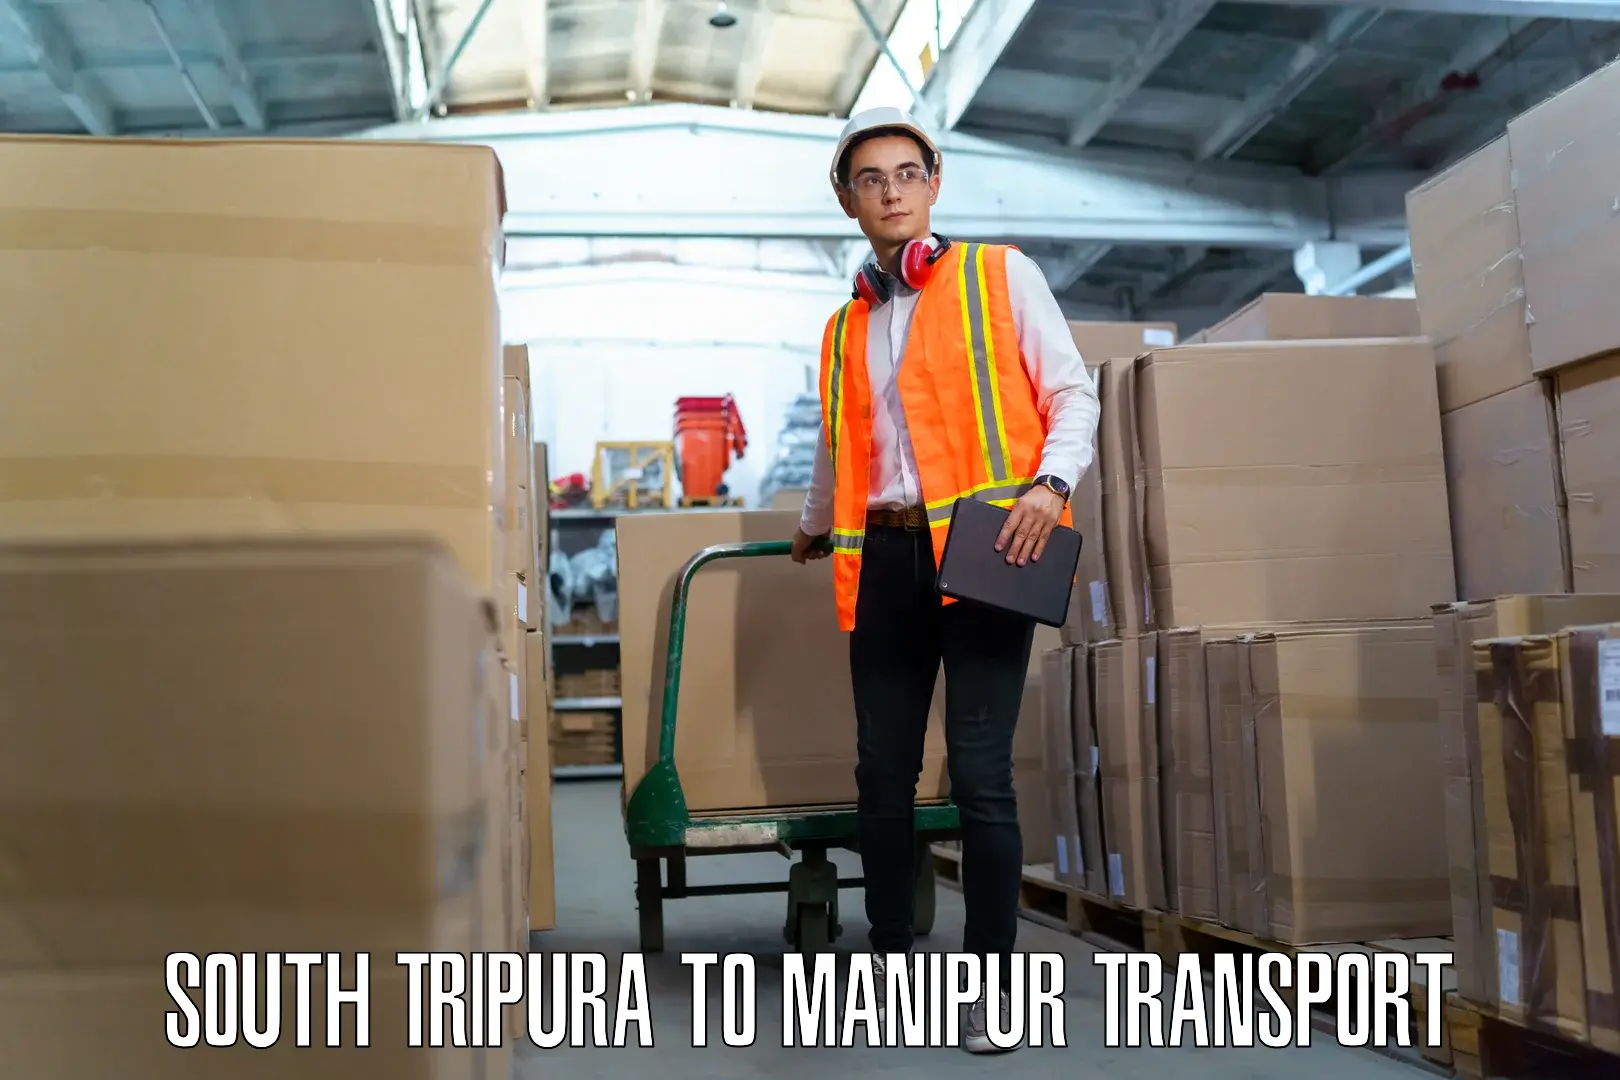 Delivery service South Tripura to Manipur